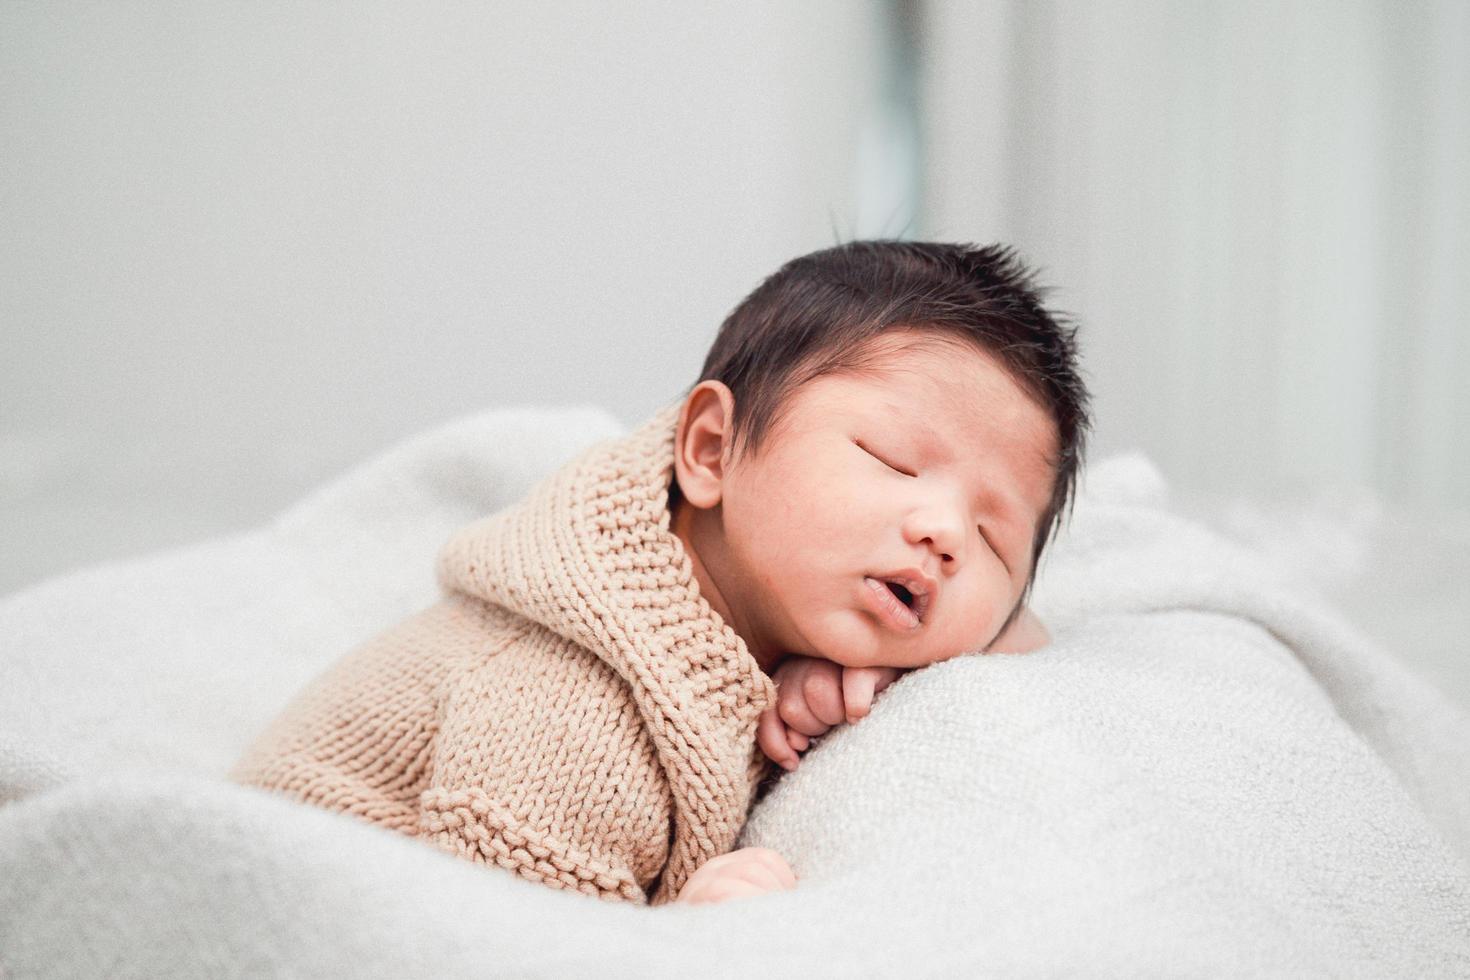 Adorable newborn baby peacefully sleeping on a white blanket photo